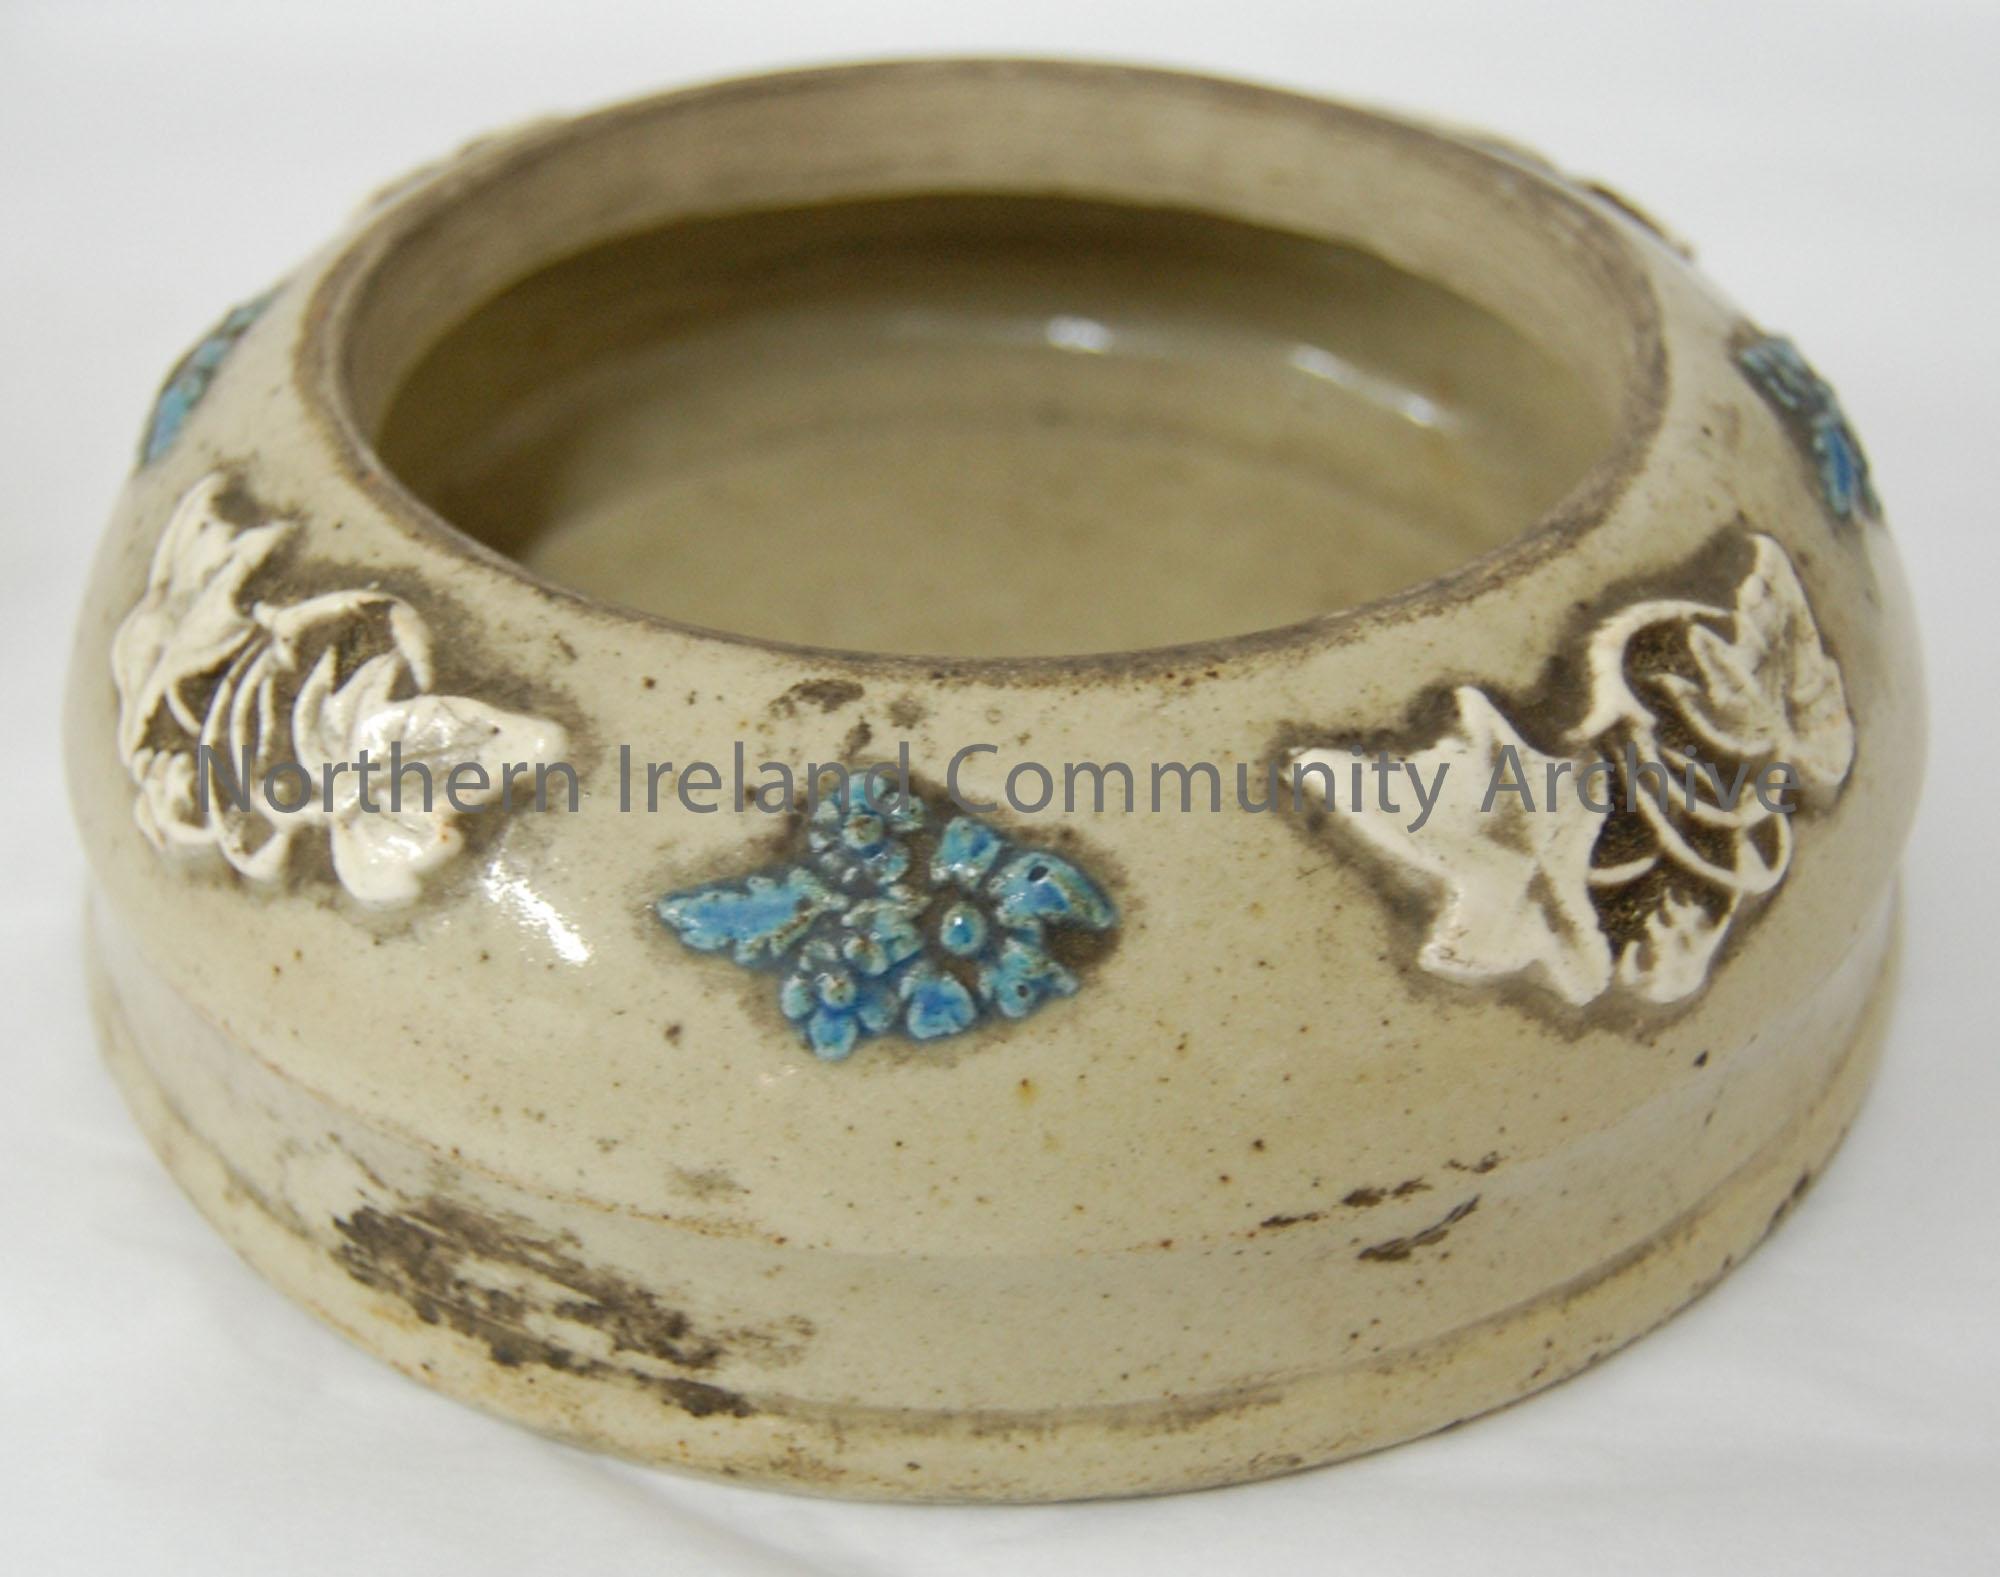 Light brown glazed bowl decorated with embossed blue and white flowers.